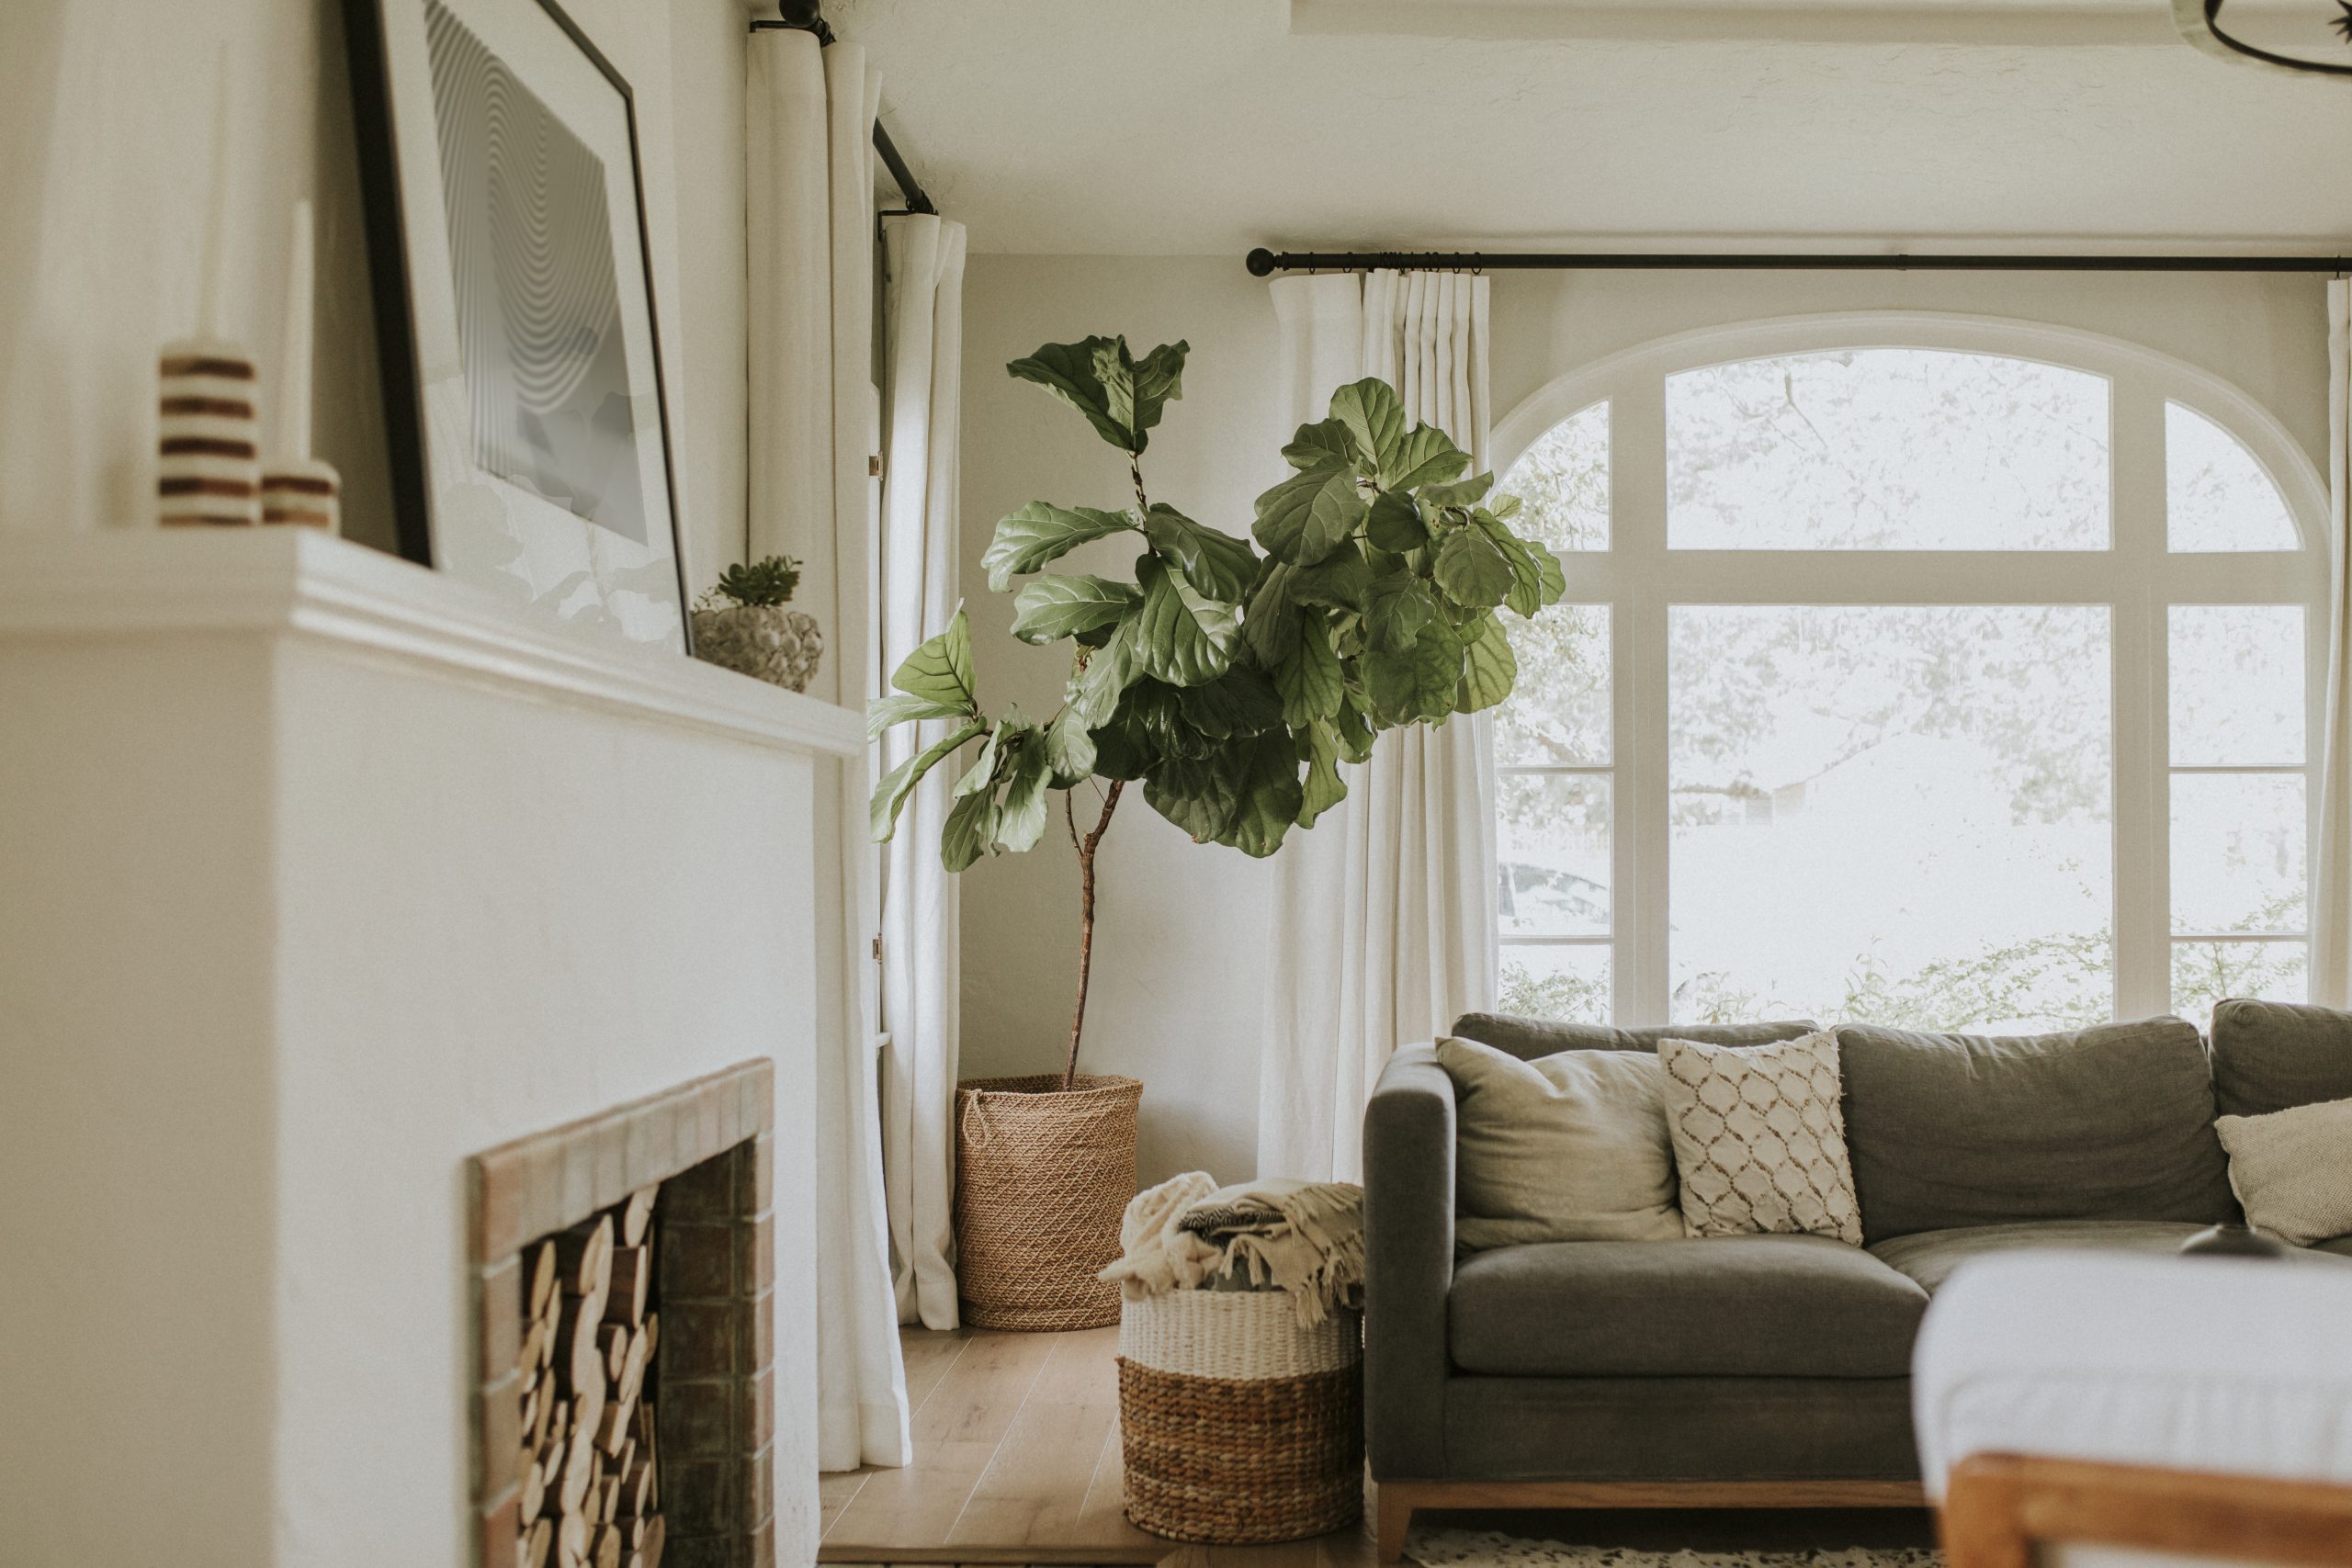 Houseplant in an interior home decor